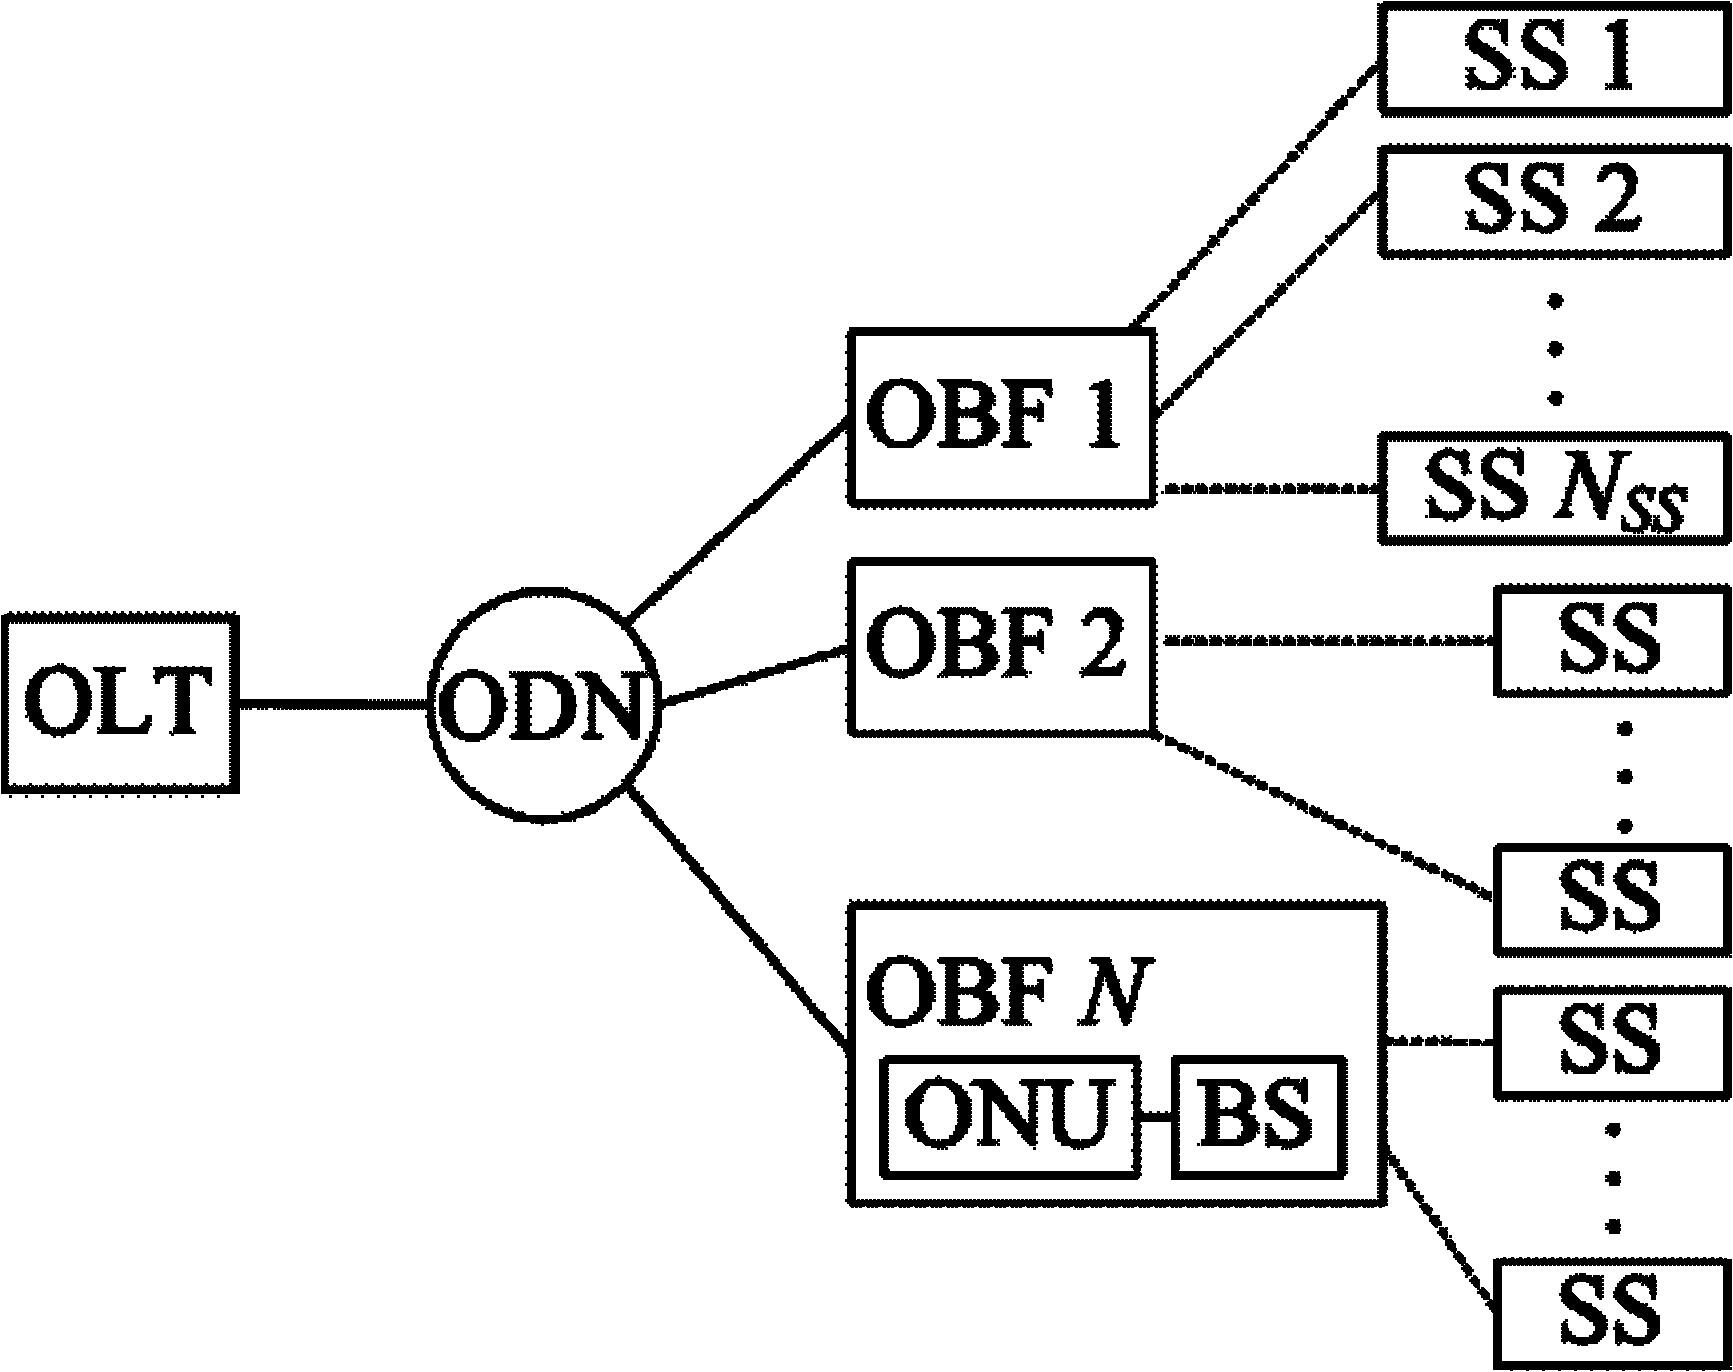 Quality of service (QoS) aware self-adaptive bandwidth distribution system for wireless-optical broadband access networks (WOBAN) and self-adaptive bandwidth distribution method